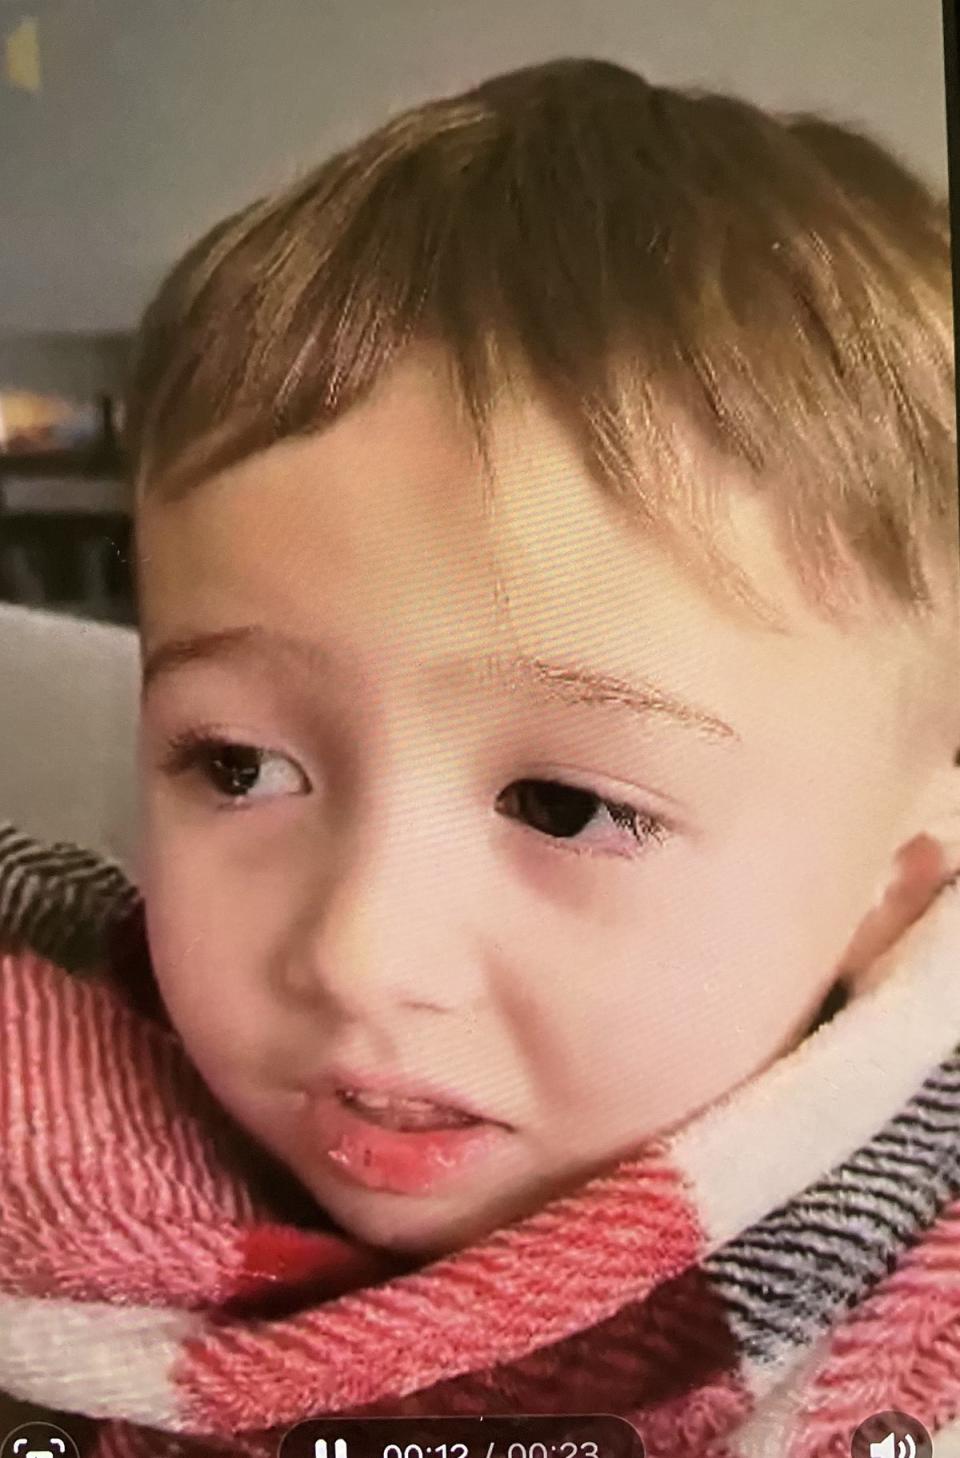 Elijah Vue, aged three, disappeared on 20 February from Two Rivers, Wisconsin (Two Rivers Police Department)